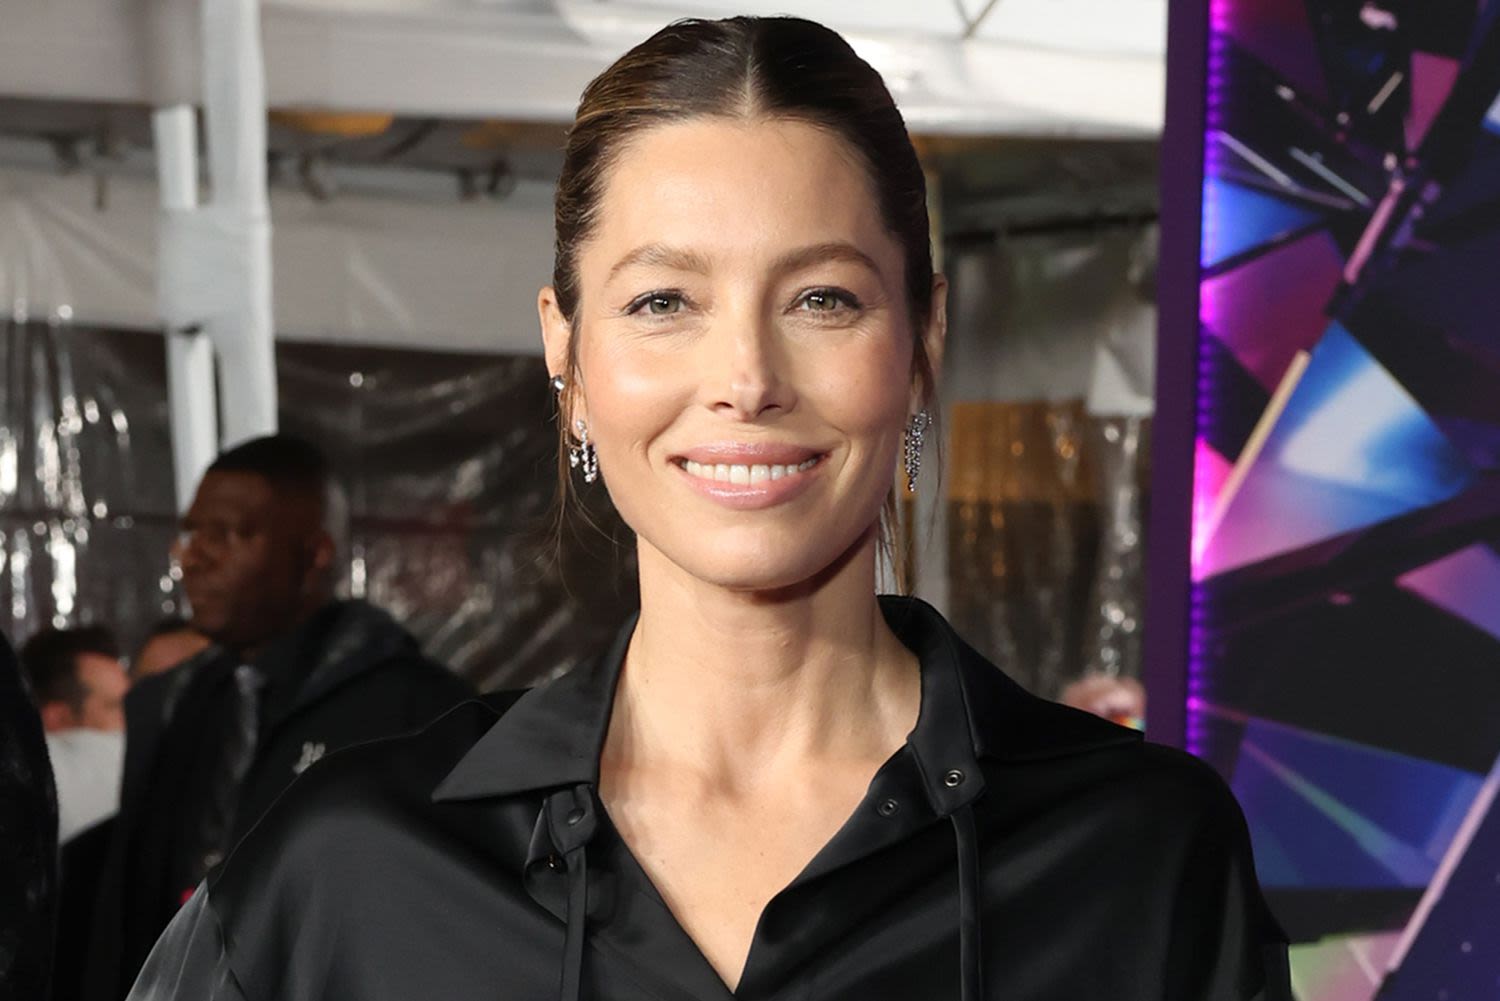 Jessica Biel Was 'Shocked How Little' She Knew About Her Own Body Until She Struggled to Get Pregnant in Her...